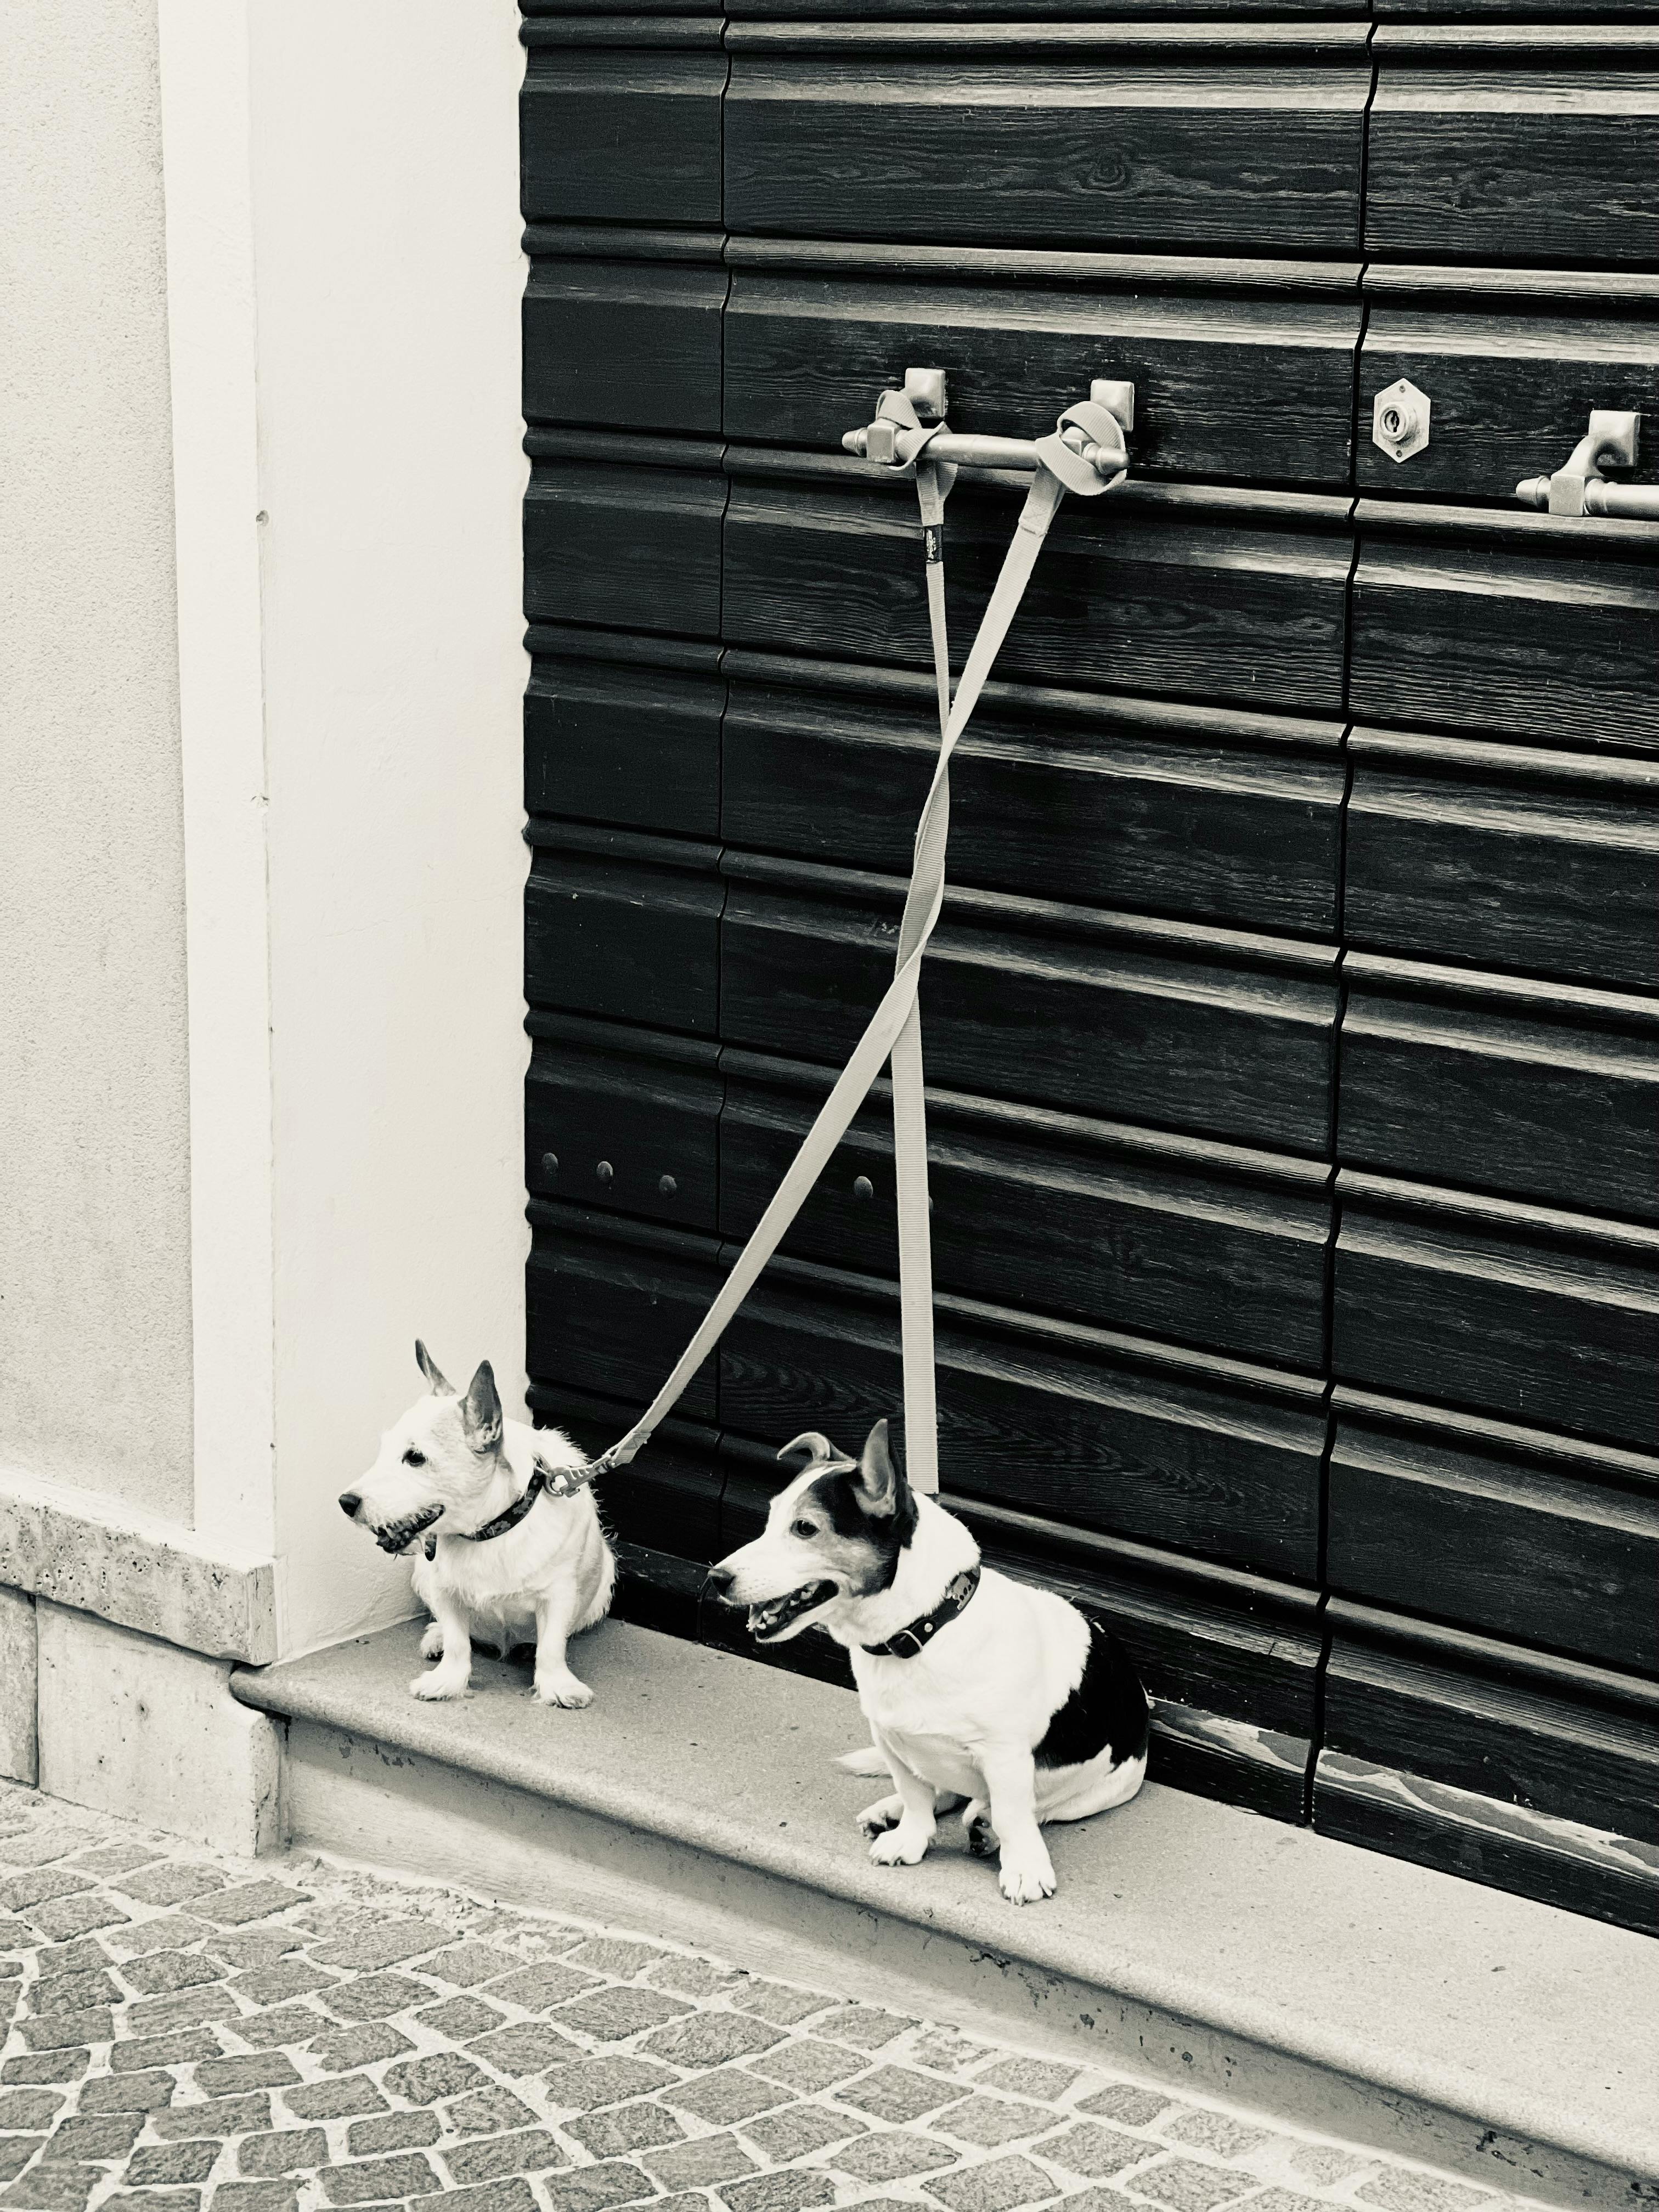 Two dogs tied up outside | Source: Pexels